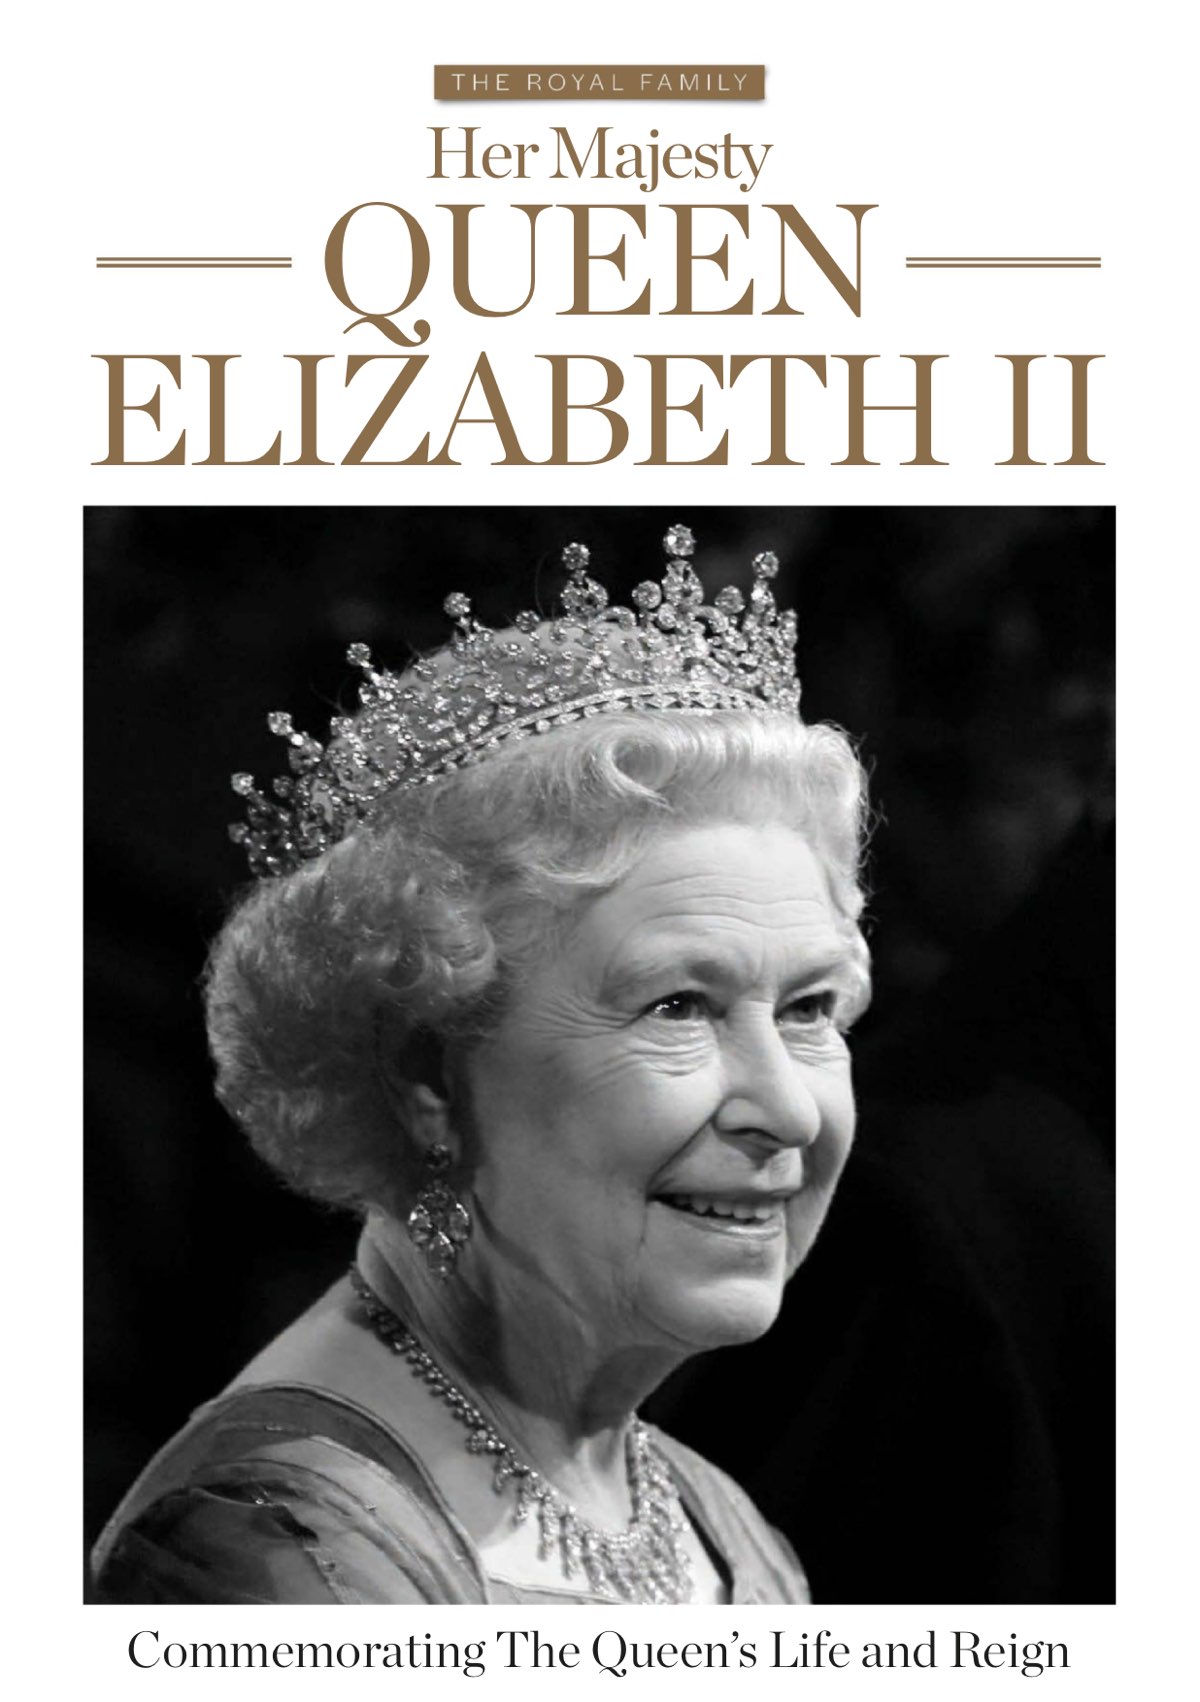 You South Africa Special - The Queen Elizabeth II Commemorative Edition [Sep 2022]